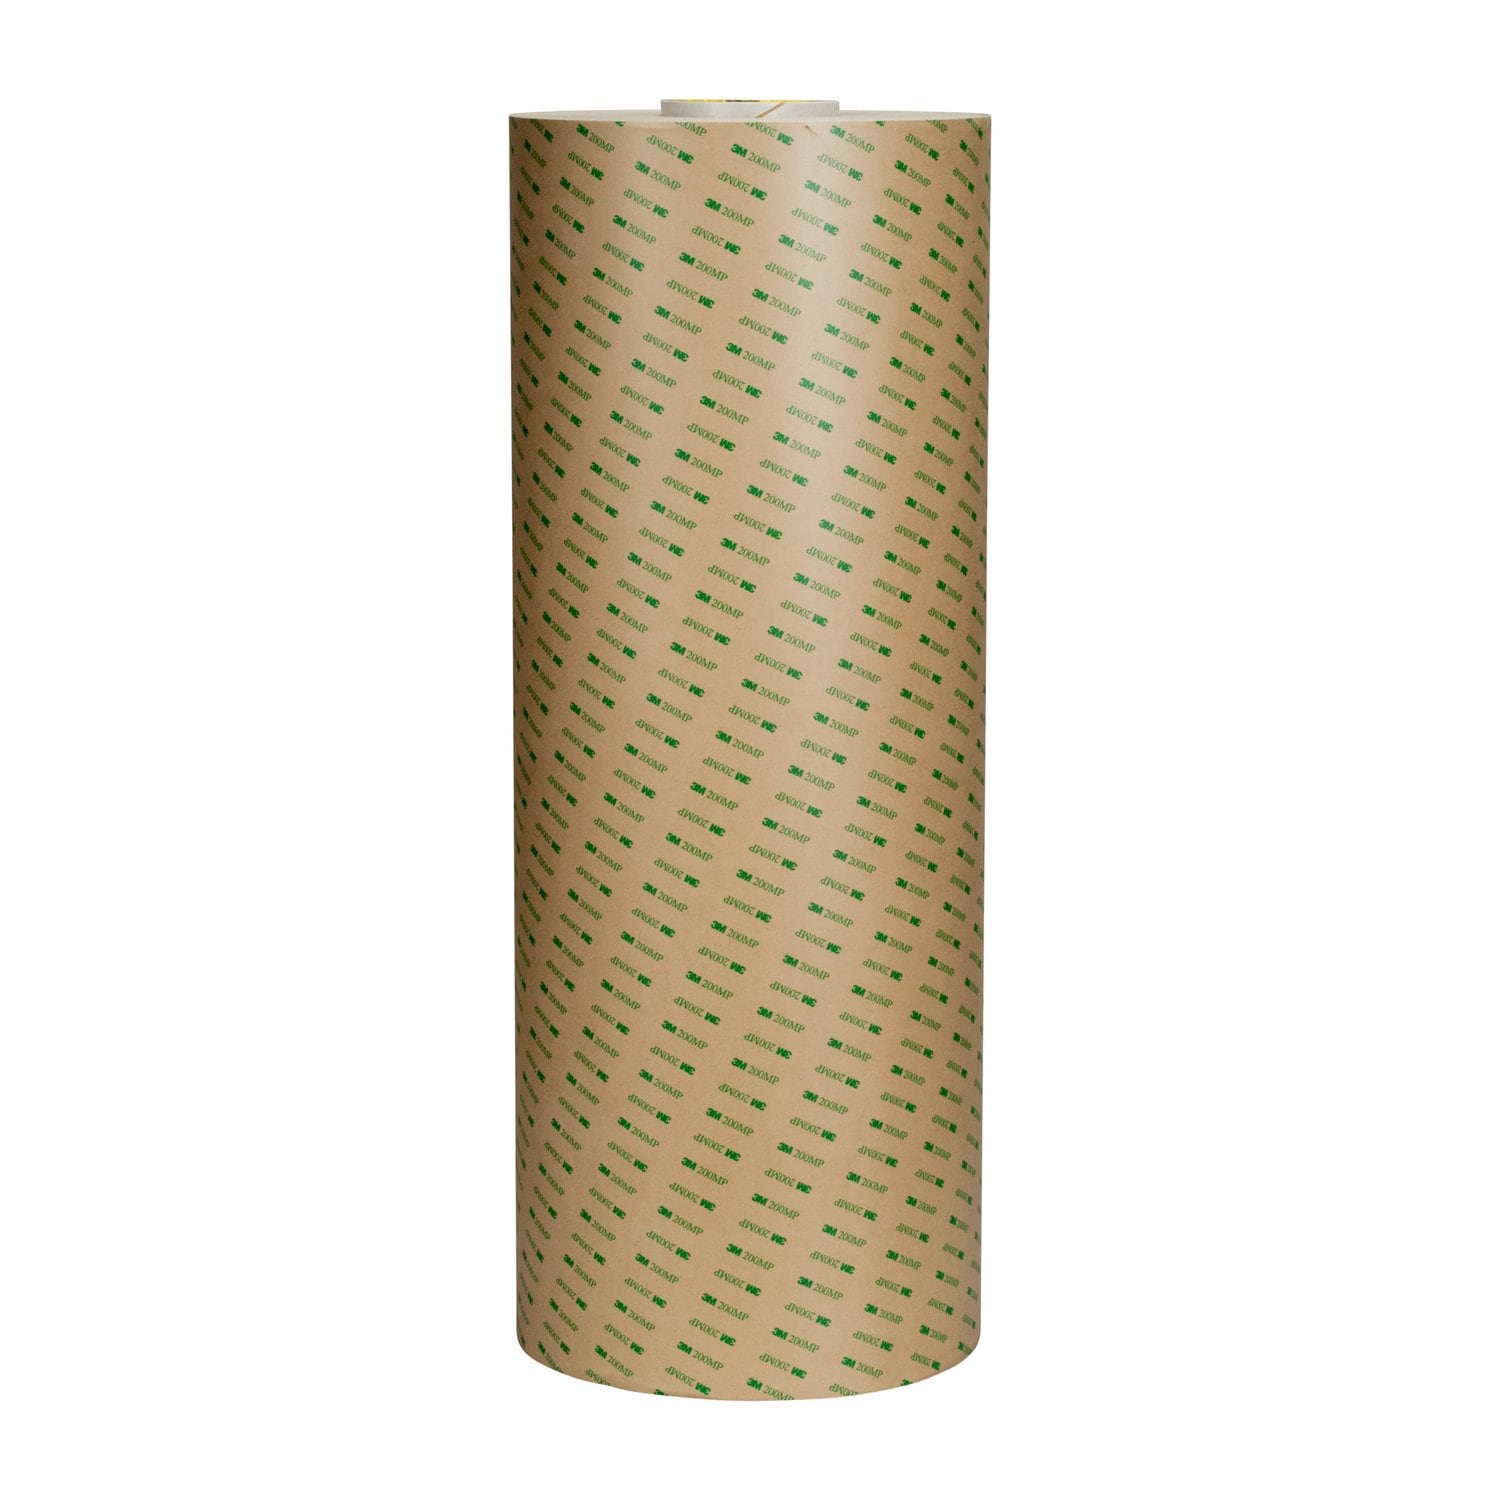 7010300054 - 3M Adhesive Transfer Tape 9667MP, Clear, 15.75 in x 180 yd, 2 Mil,
1/Case